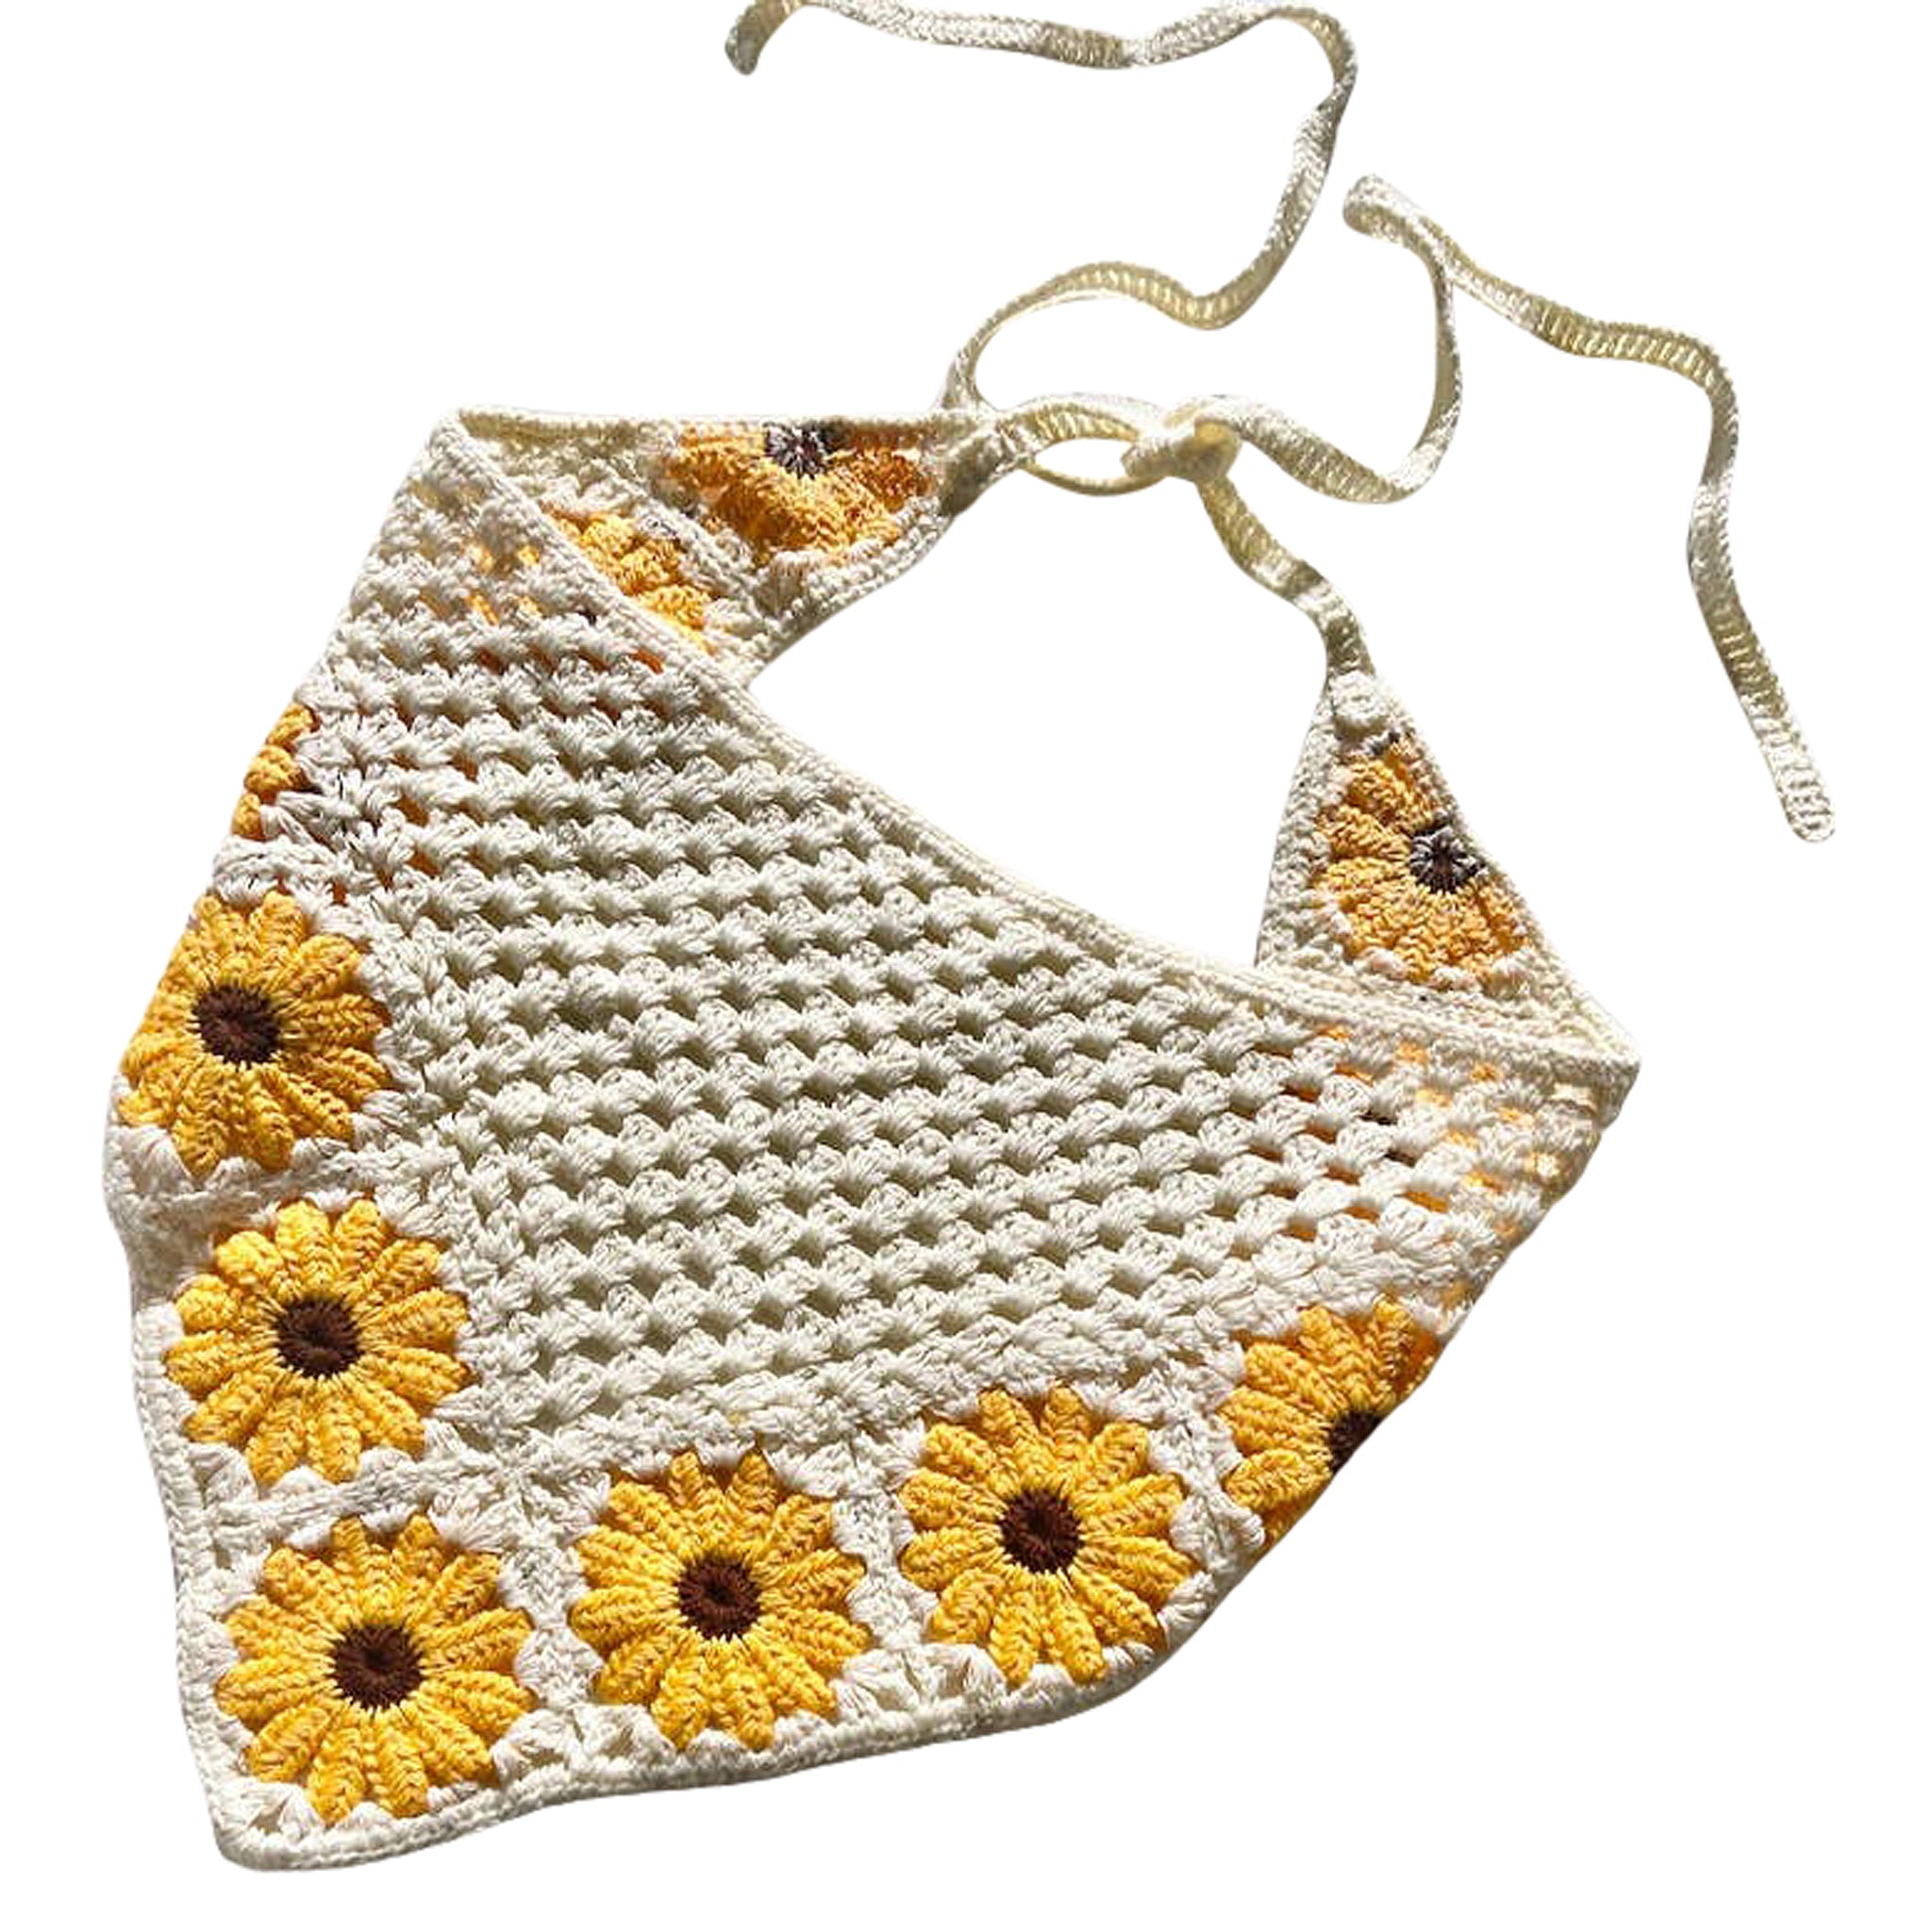 Solar Eclipse Daisy Floral Hand Knit Crochet Hair Scarf in White